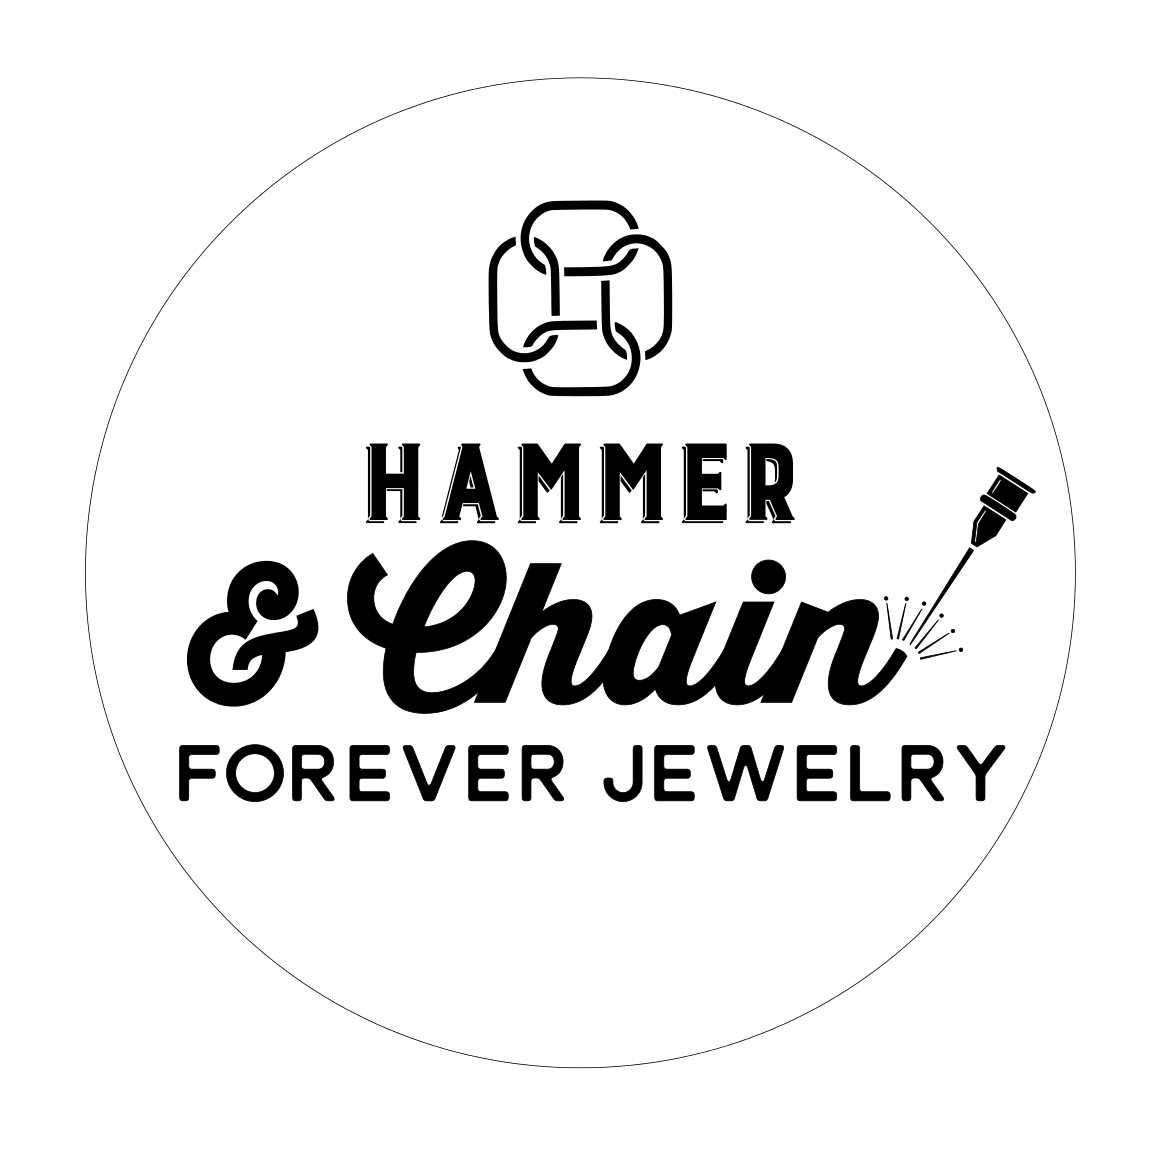 Hammer & Chain Forever Jewelry – HAMMER & Stain Madison